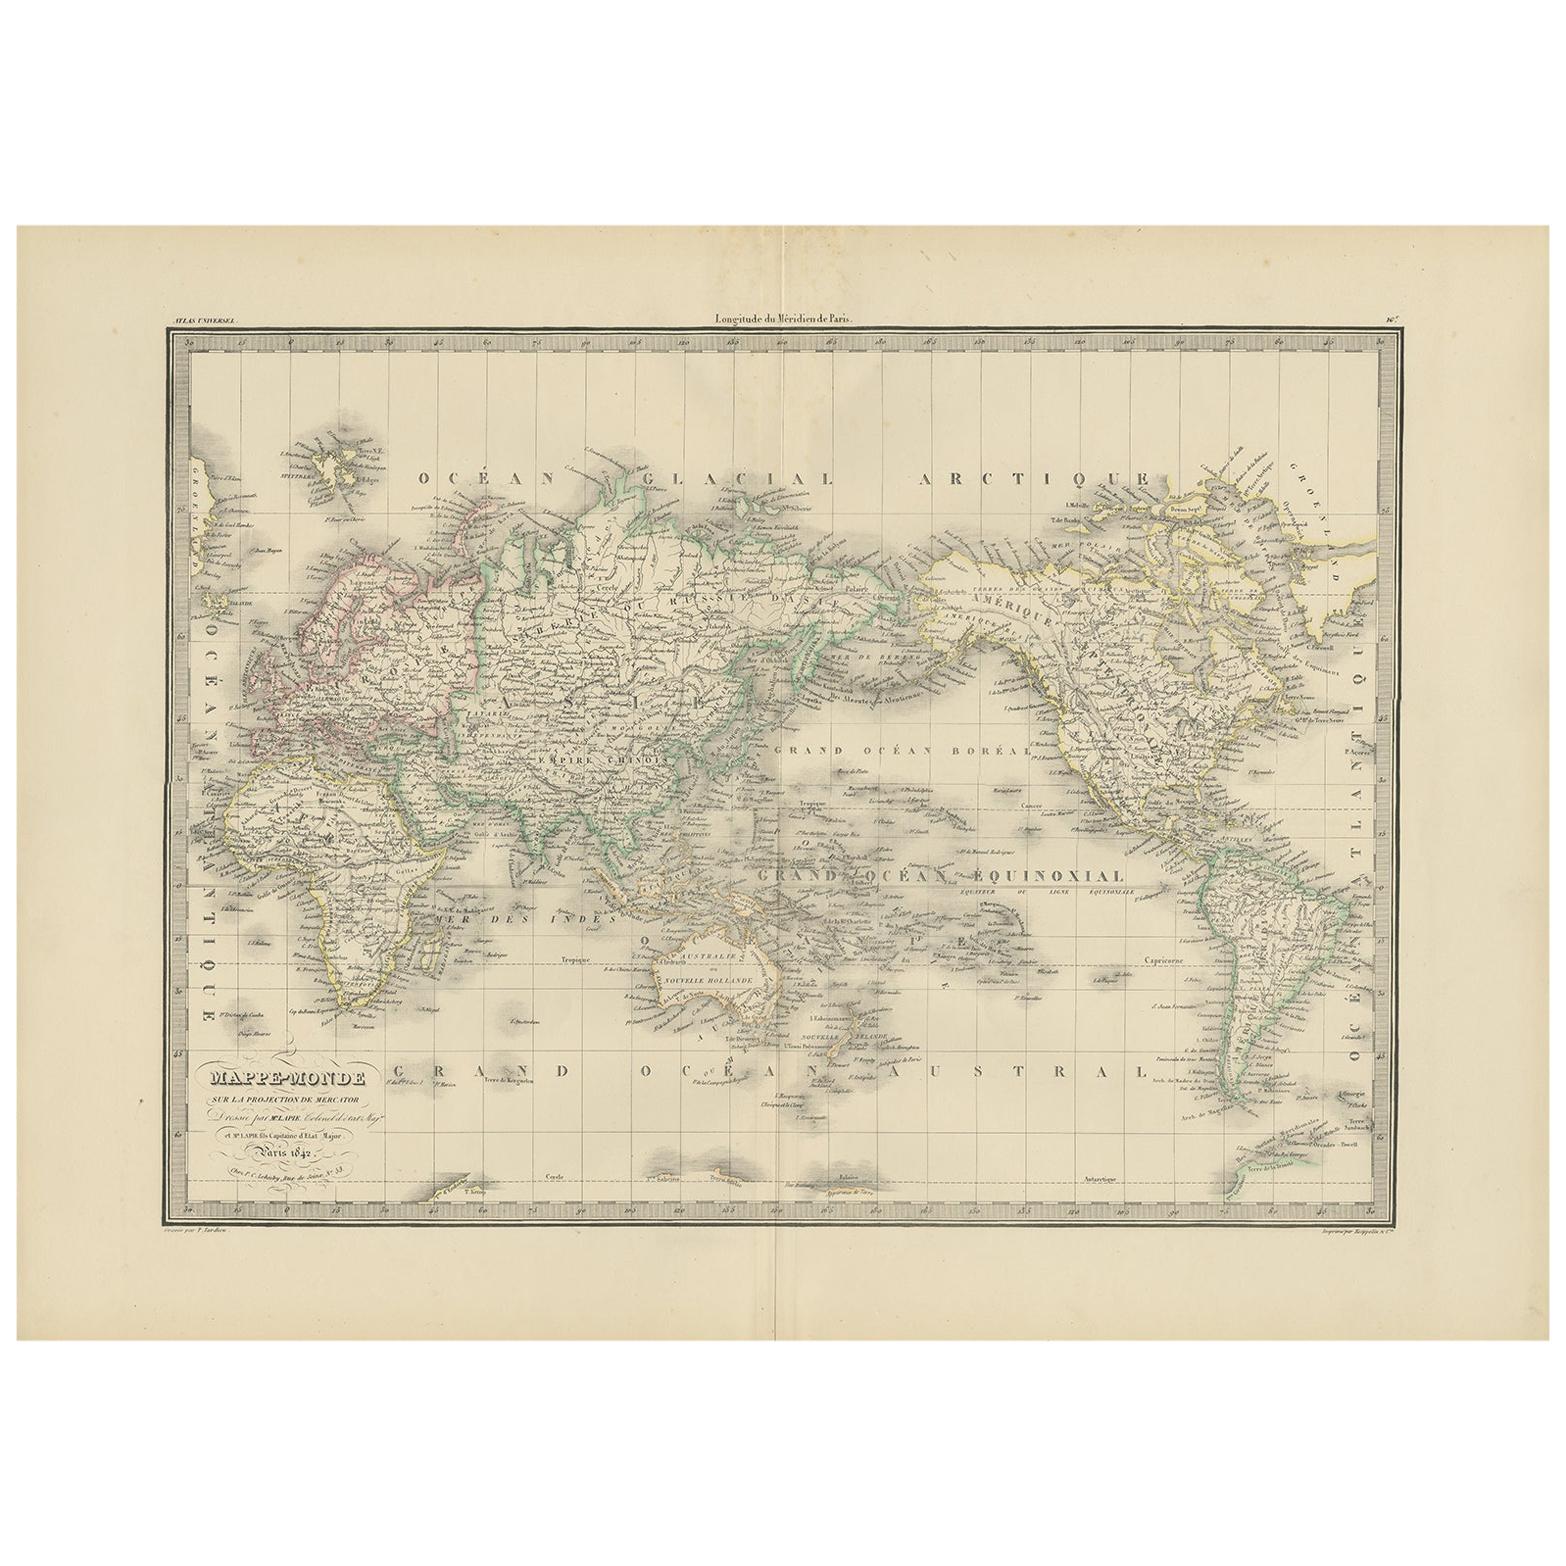 Antique World Map 'Mercator Projection' by Lapie, 1842